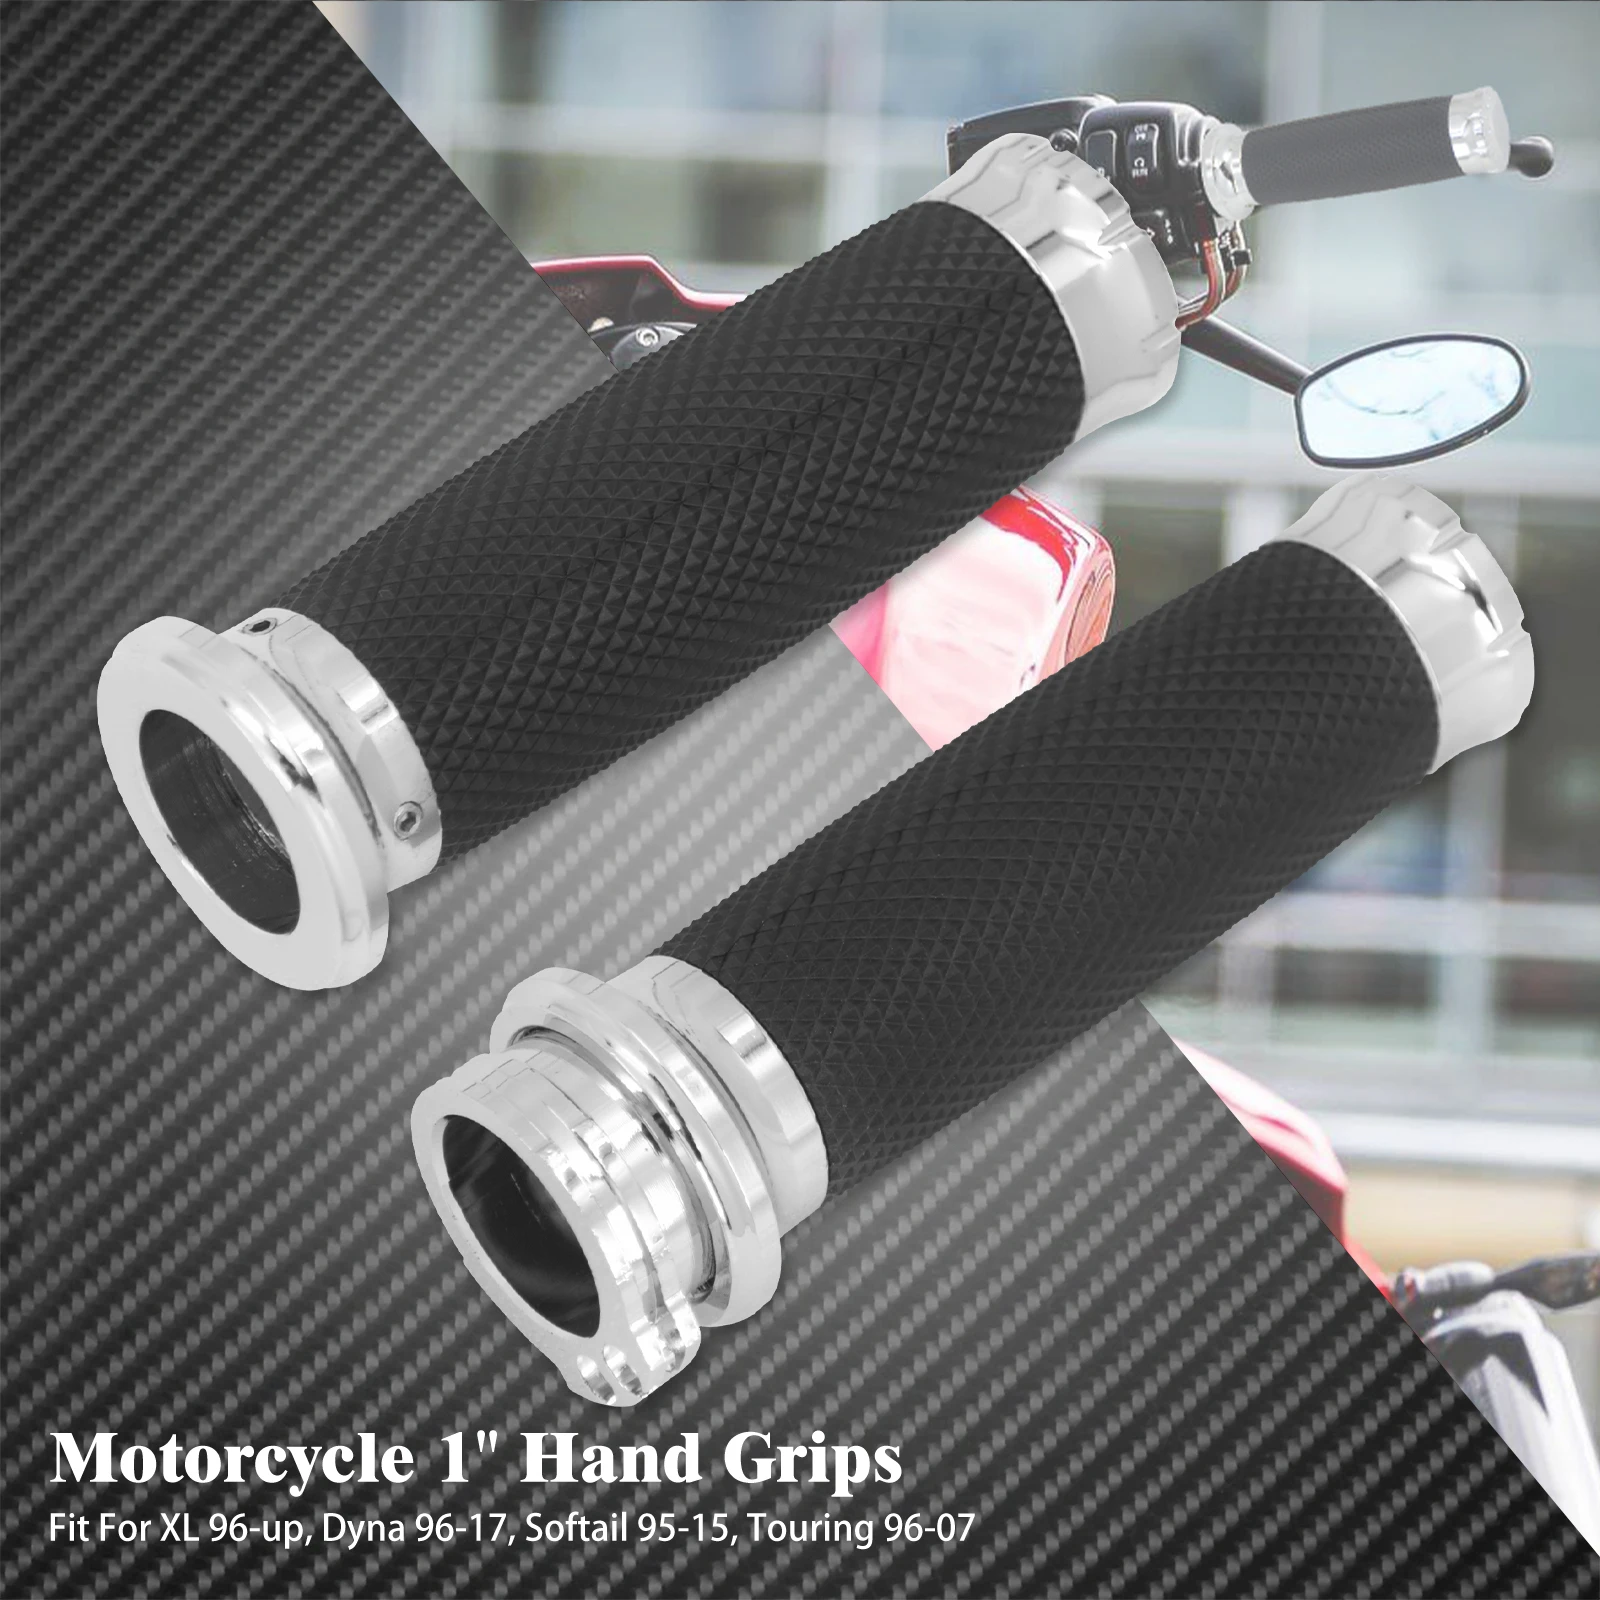 

Motorcycle 1'' Hand Grips 25mm Handle Bar For Harley Touring Road Glide FLHR 96-07 Sportster XL883 Dyna Softail 95-15 Hand Grip